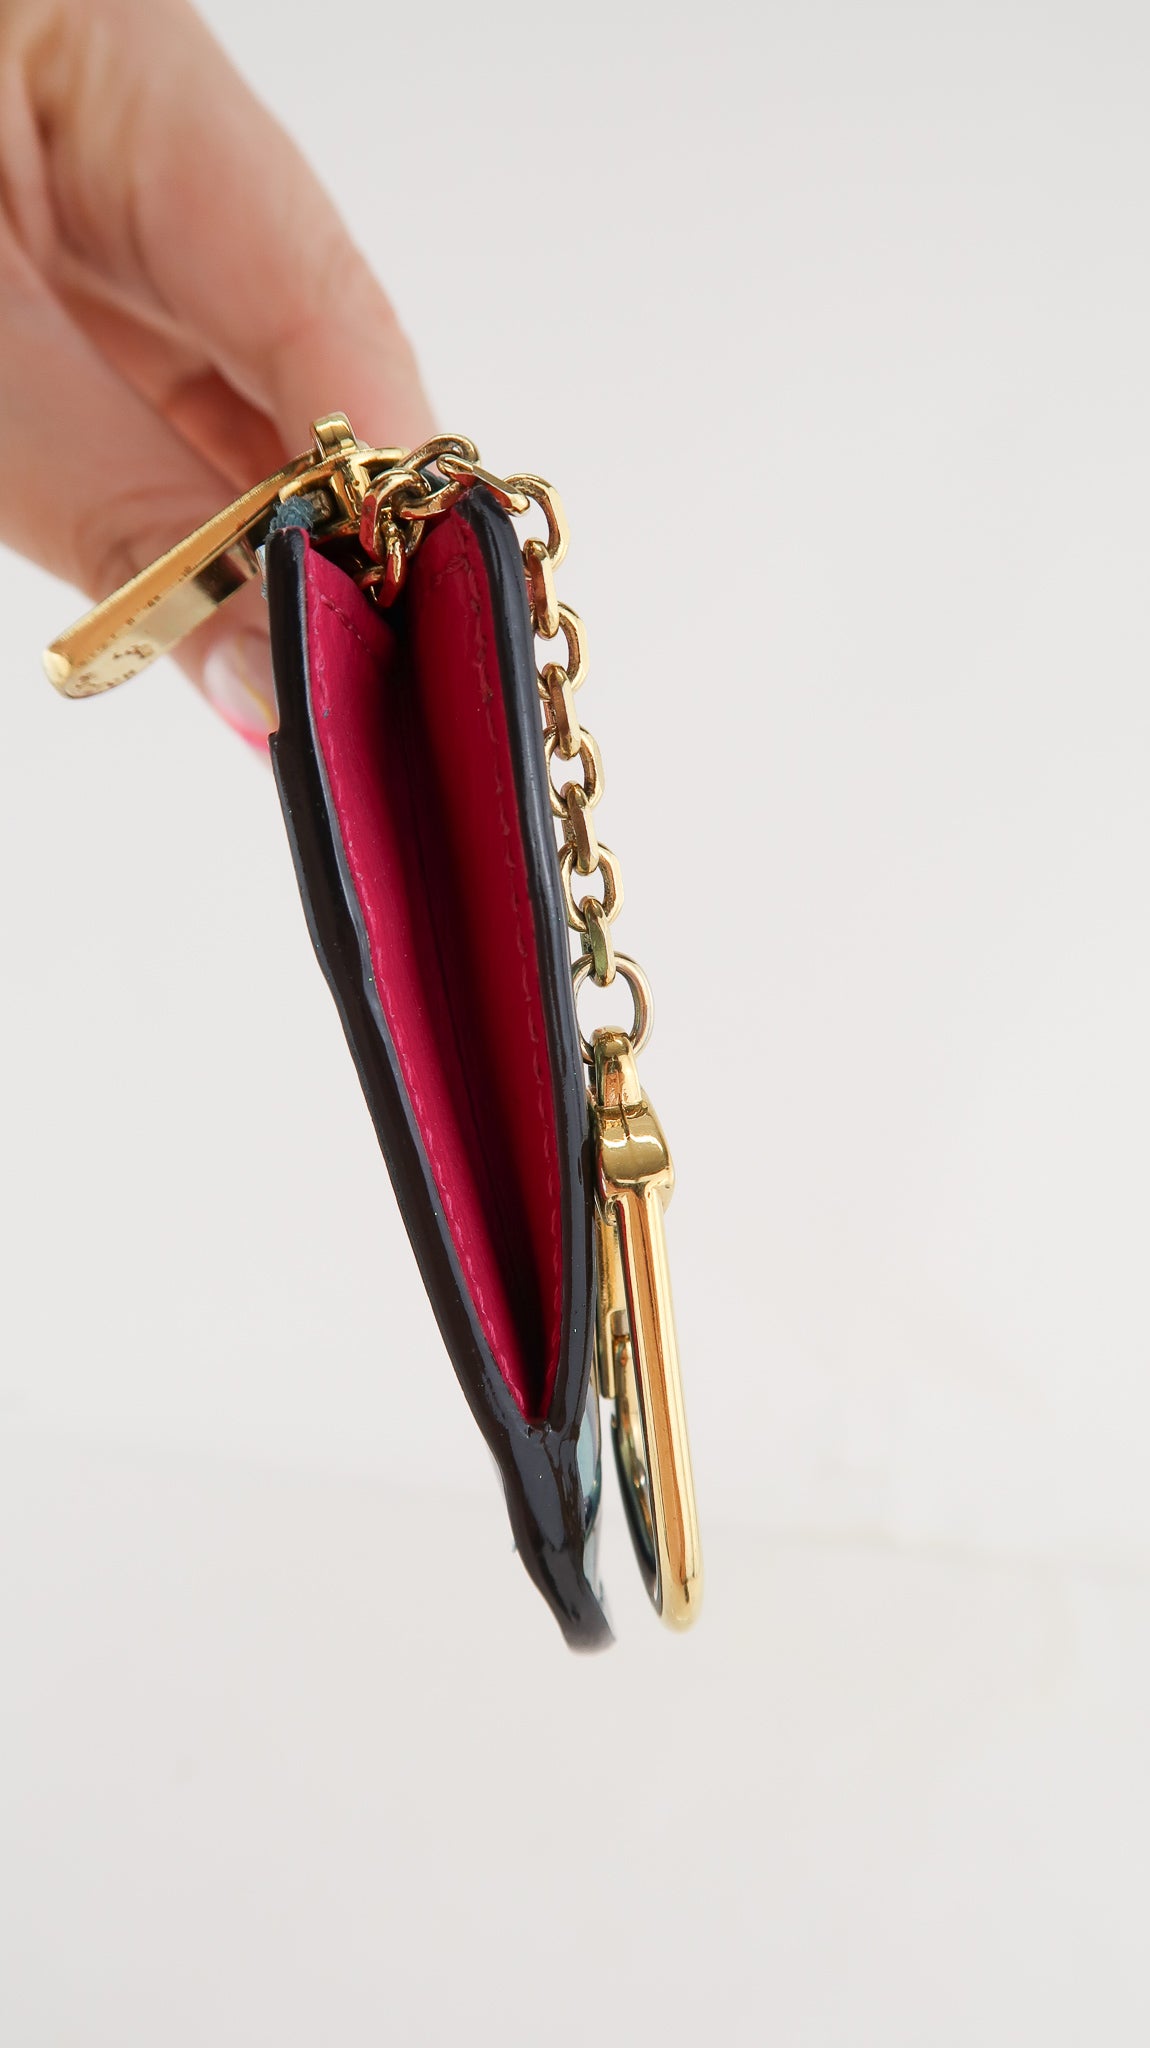 Louis Vuitton Key Pouch Monogram Vernis Metallic Blue/Pink in Patent Calf  Leather with Gold-tone - US